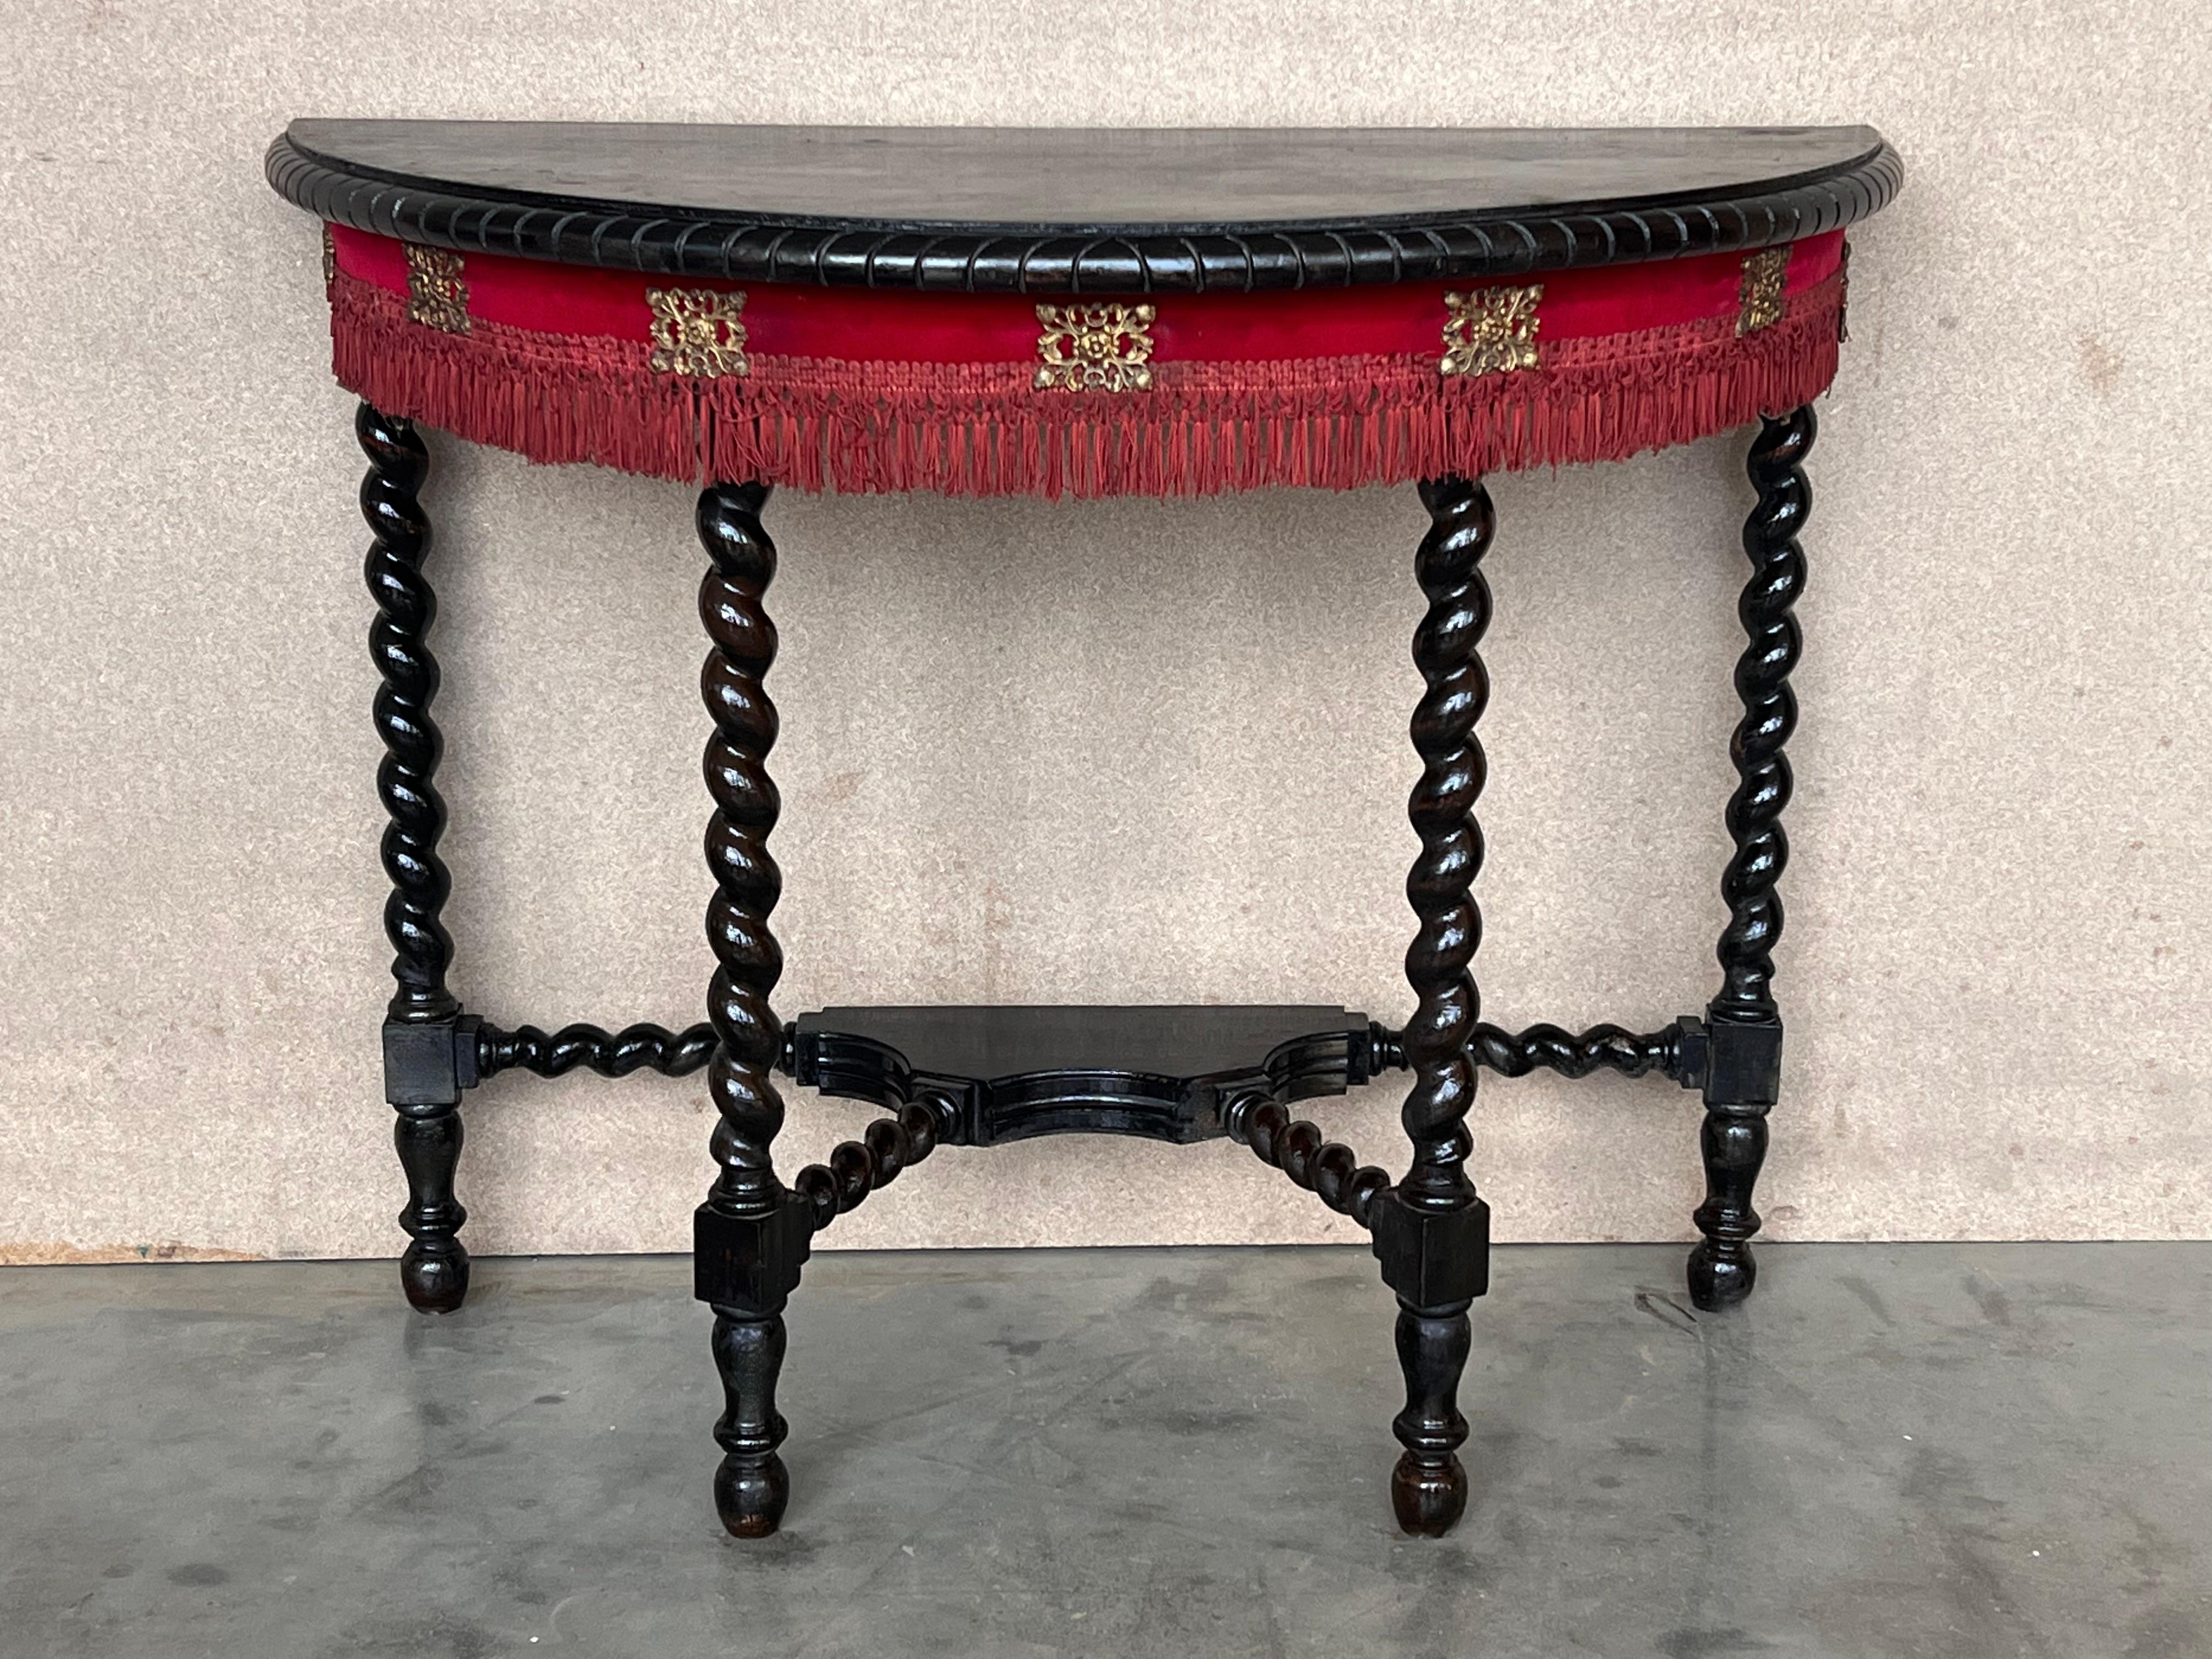 19th century Spanish demilune table made from walnut. The top has a beleveled merge The table is supported on hand-turned Solomonic shaped legs  joined by simple curved stretcher.